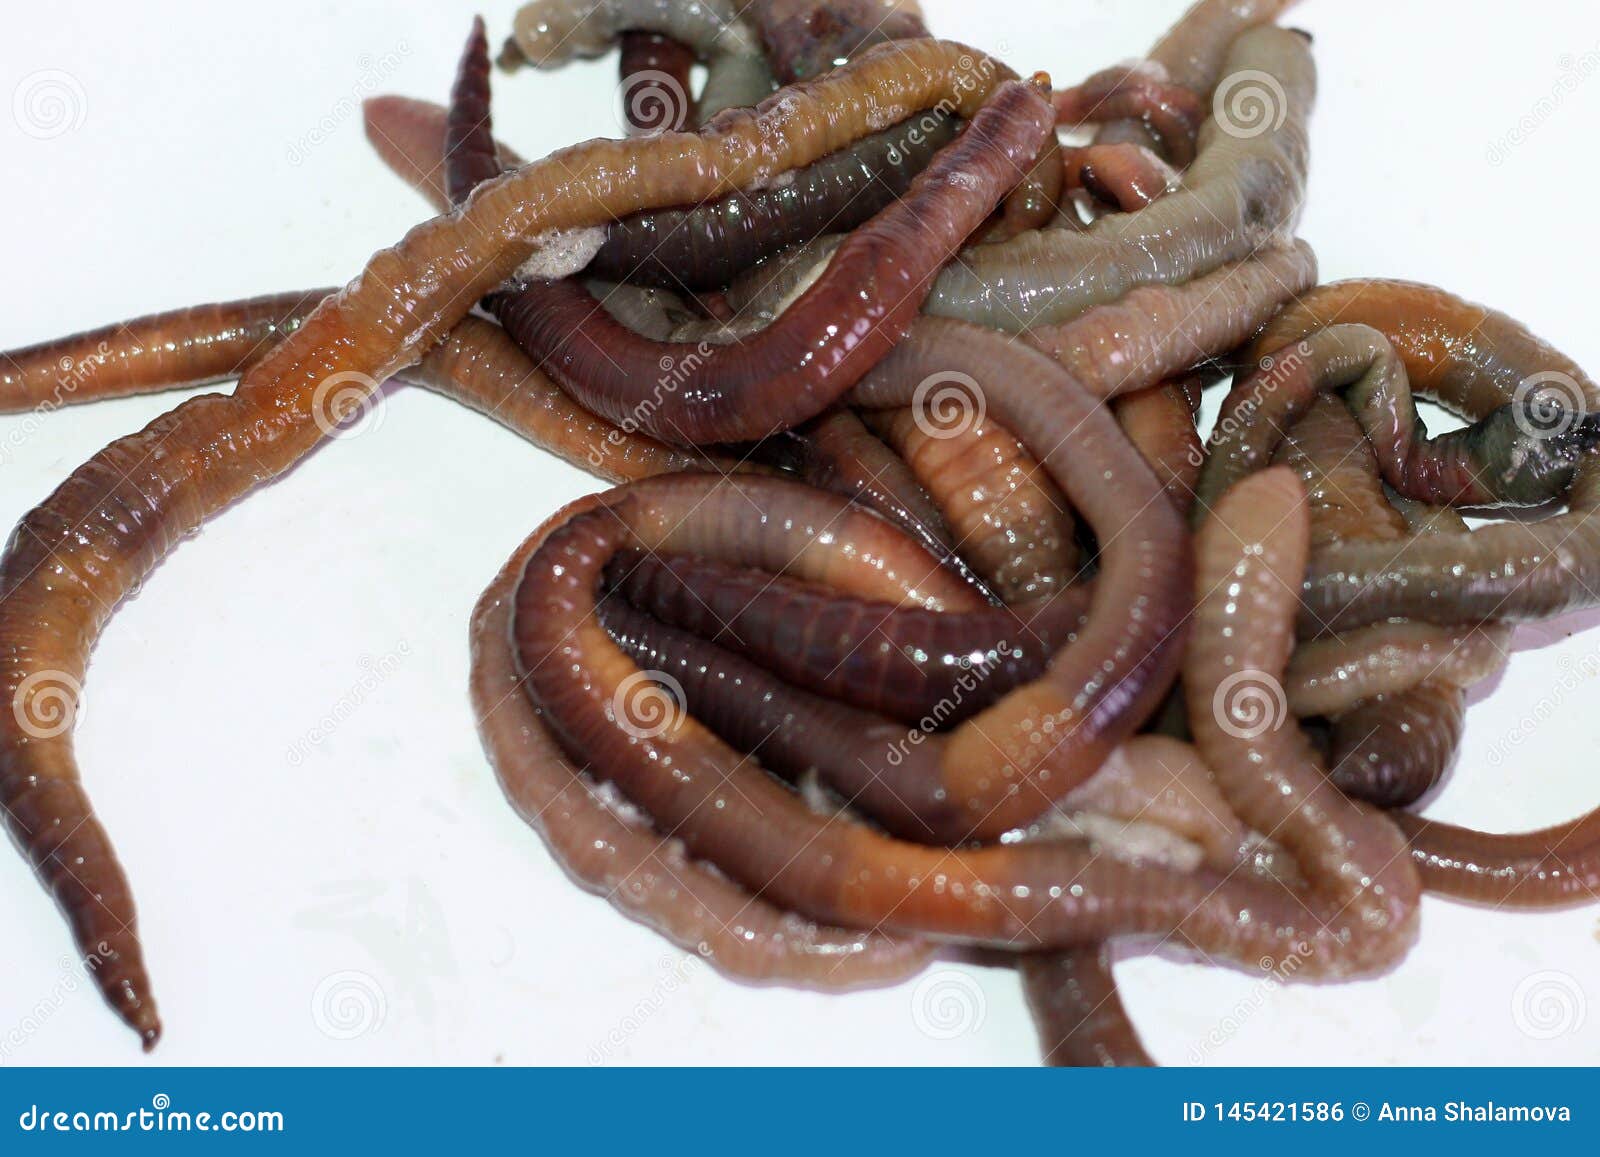 https://thumbs.dreamstime.com/z/macro-shooting-red-dendrobaena-worms-live-earthworm-bait-fishing-macro-shooting-red-dendrobaena-worms-live-earthworm-145421586.jpg